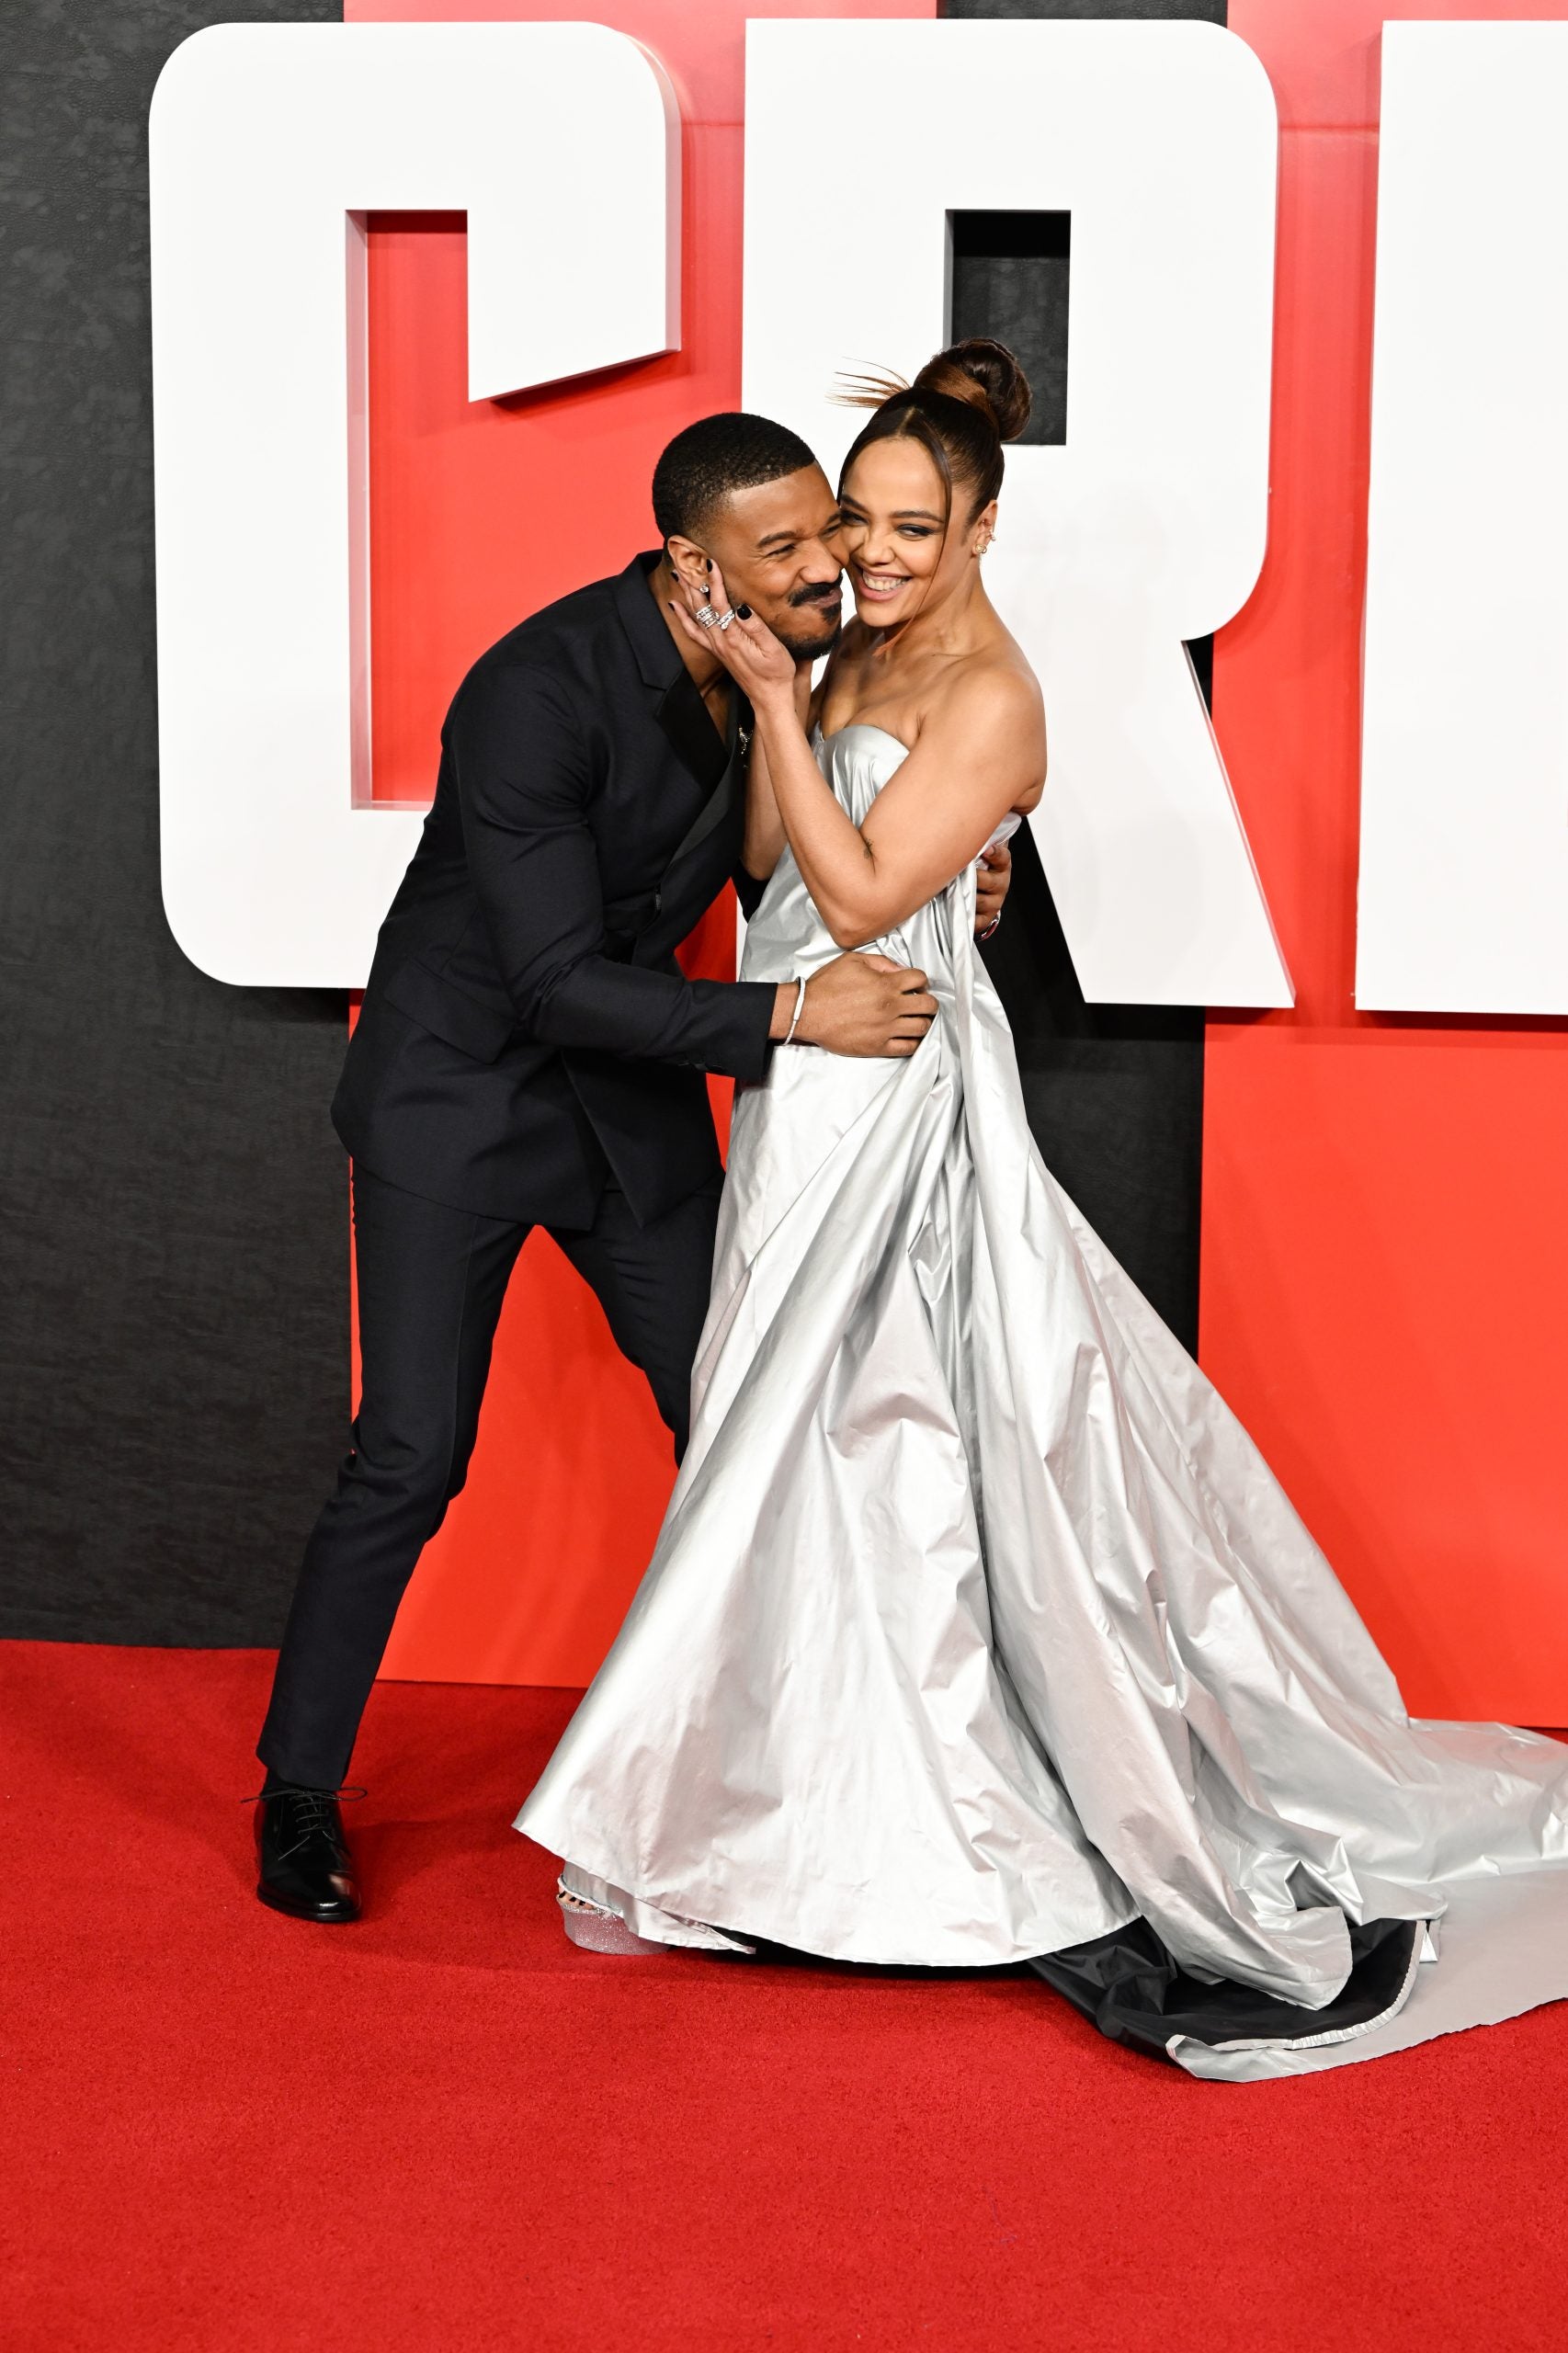 Stars Step On The Red Carpet For 'Creed III,' 'Snowfall' And More Premieres